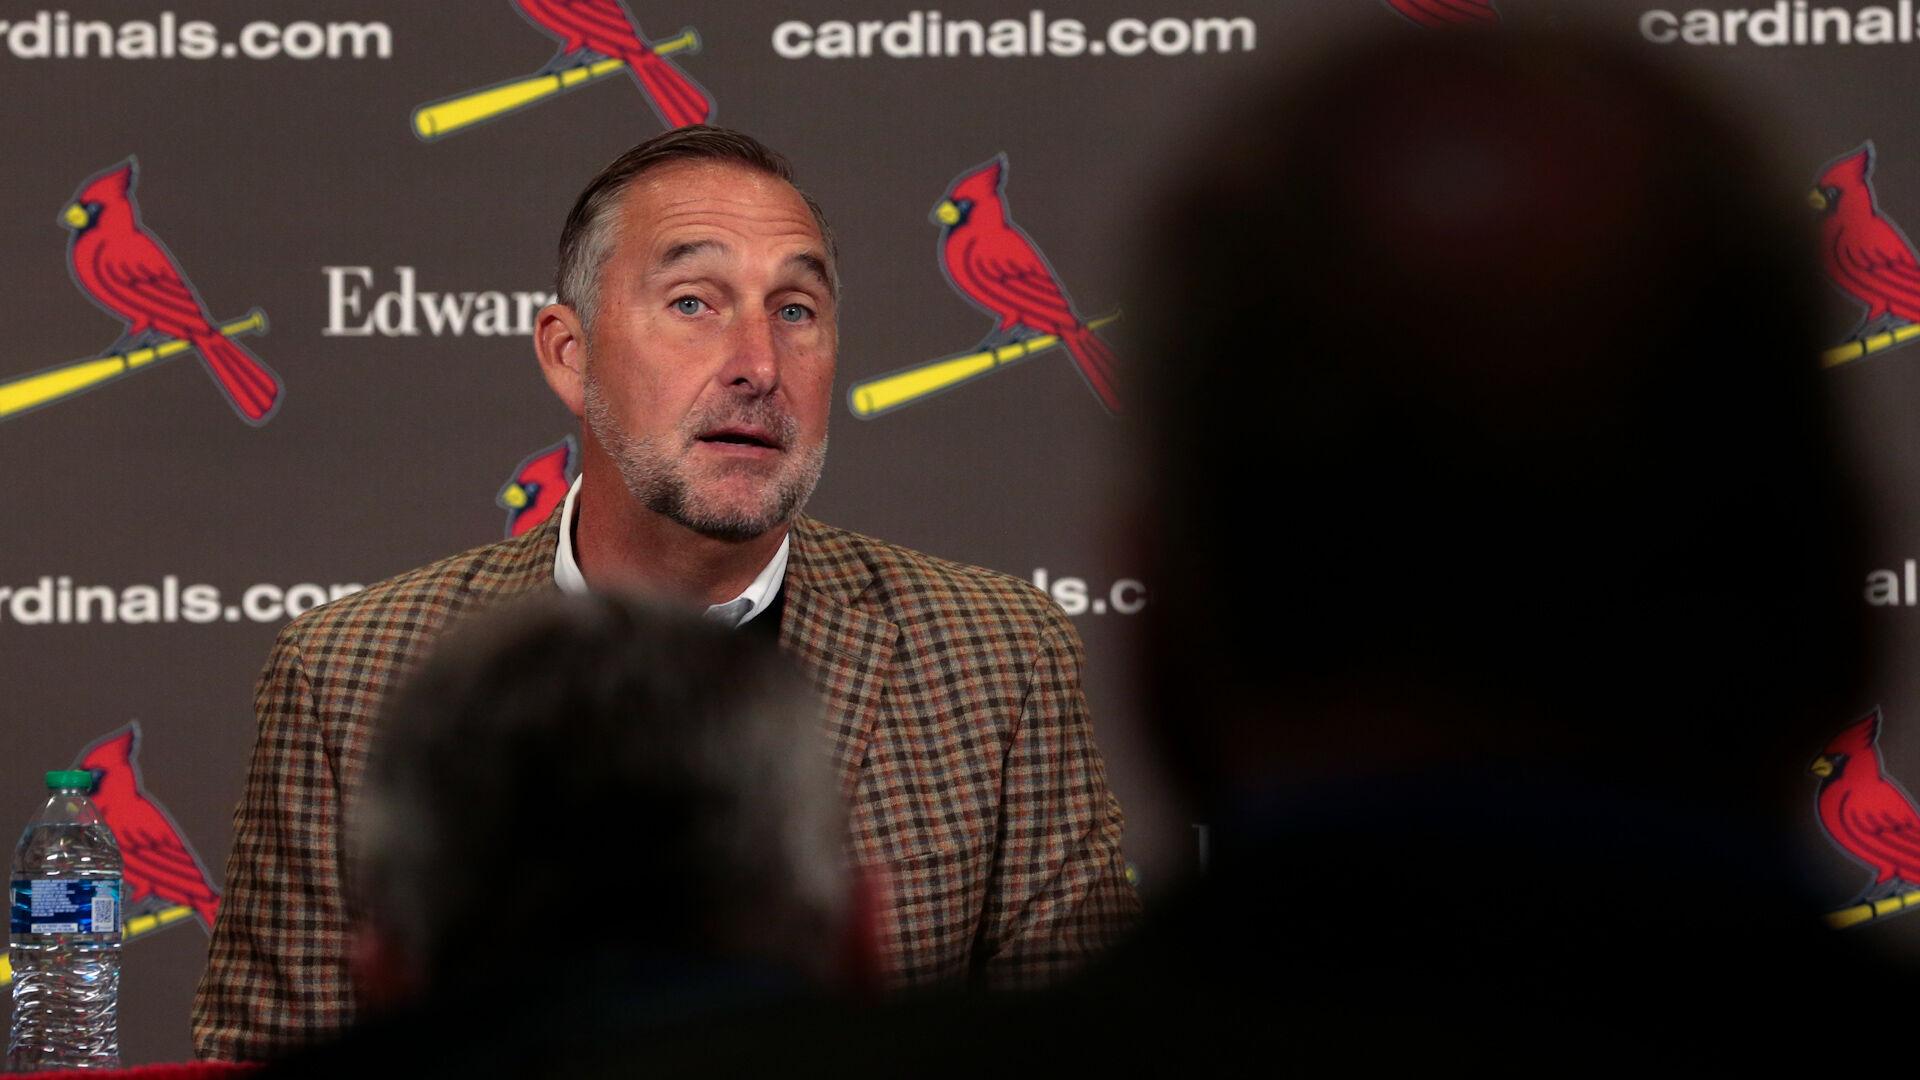 Jeff Albert, Mike Maddux are gone. Who could become Cardinals hitting,  pitching coaches?